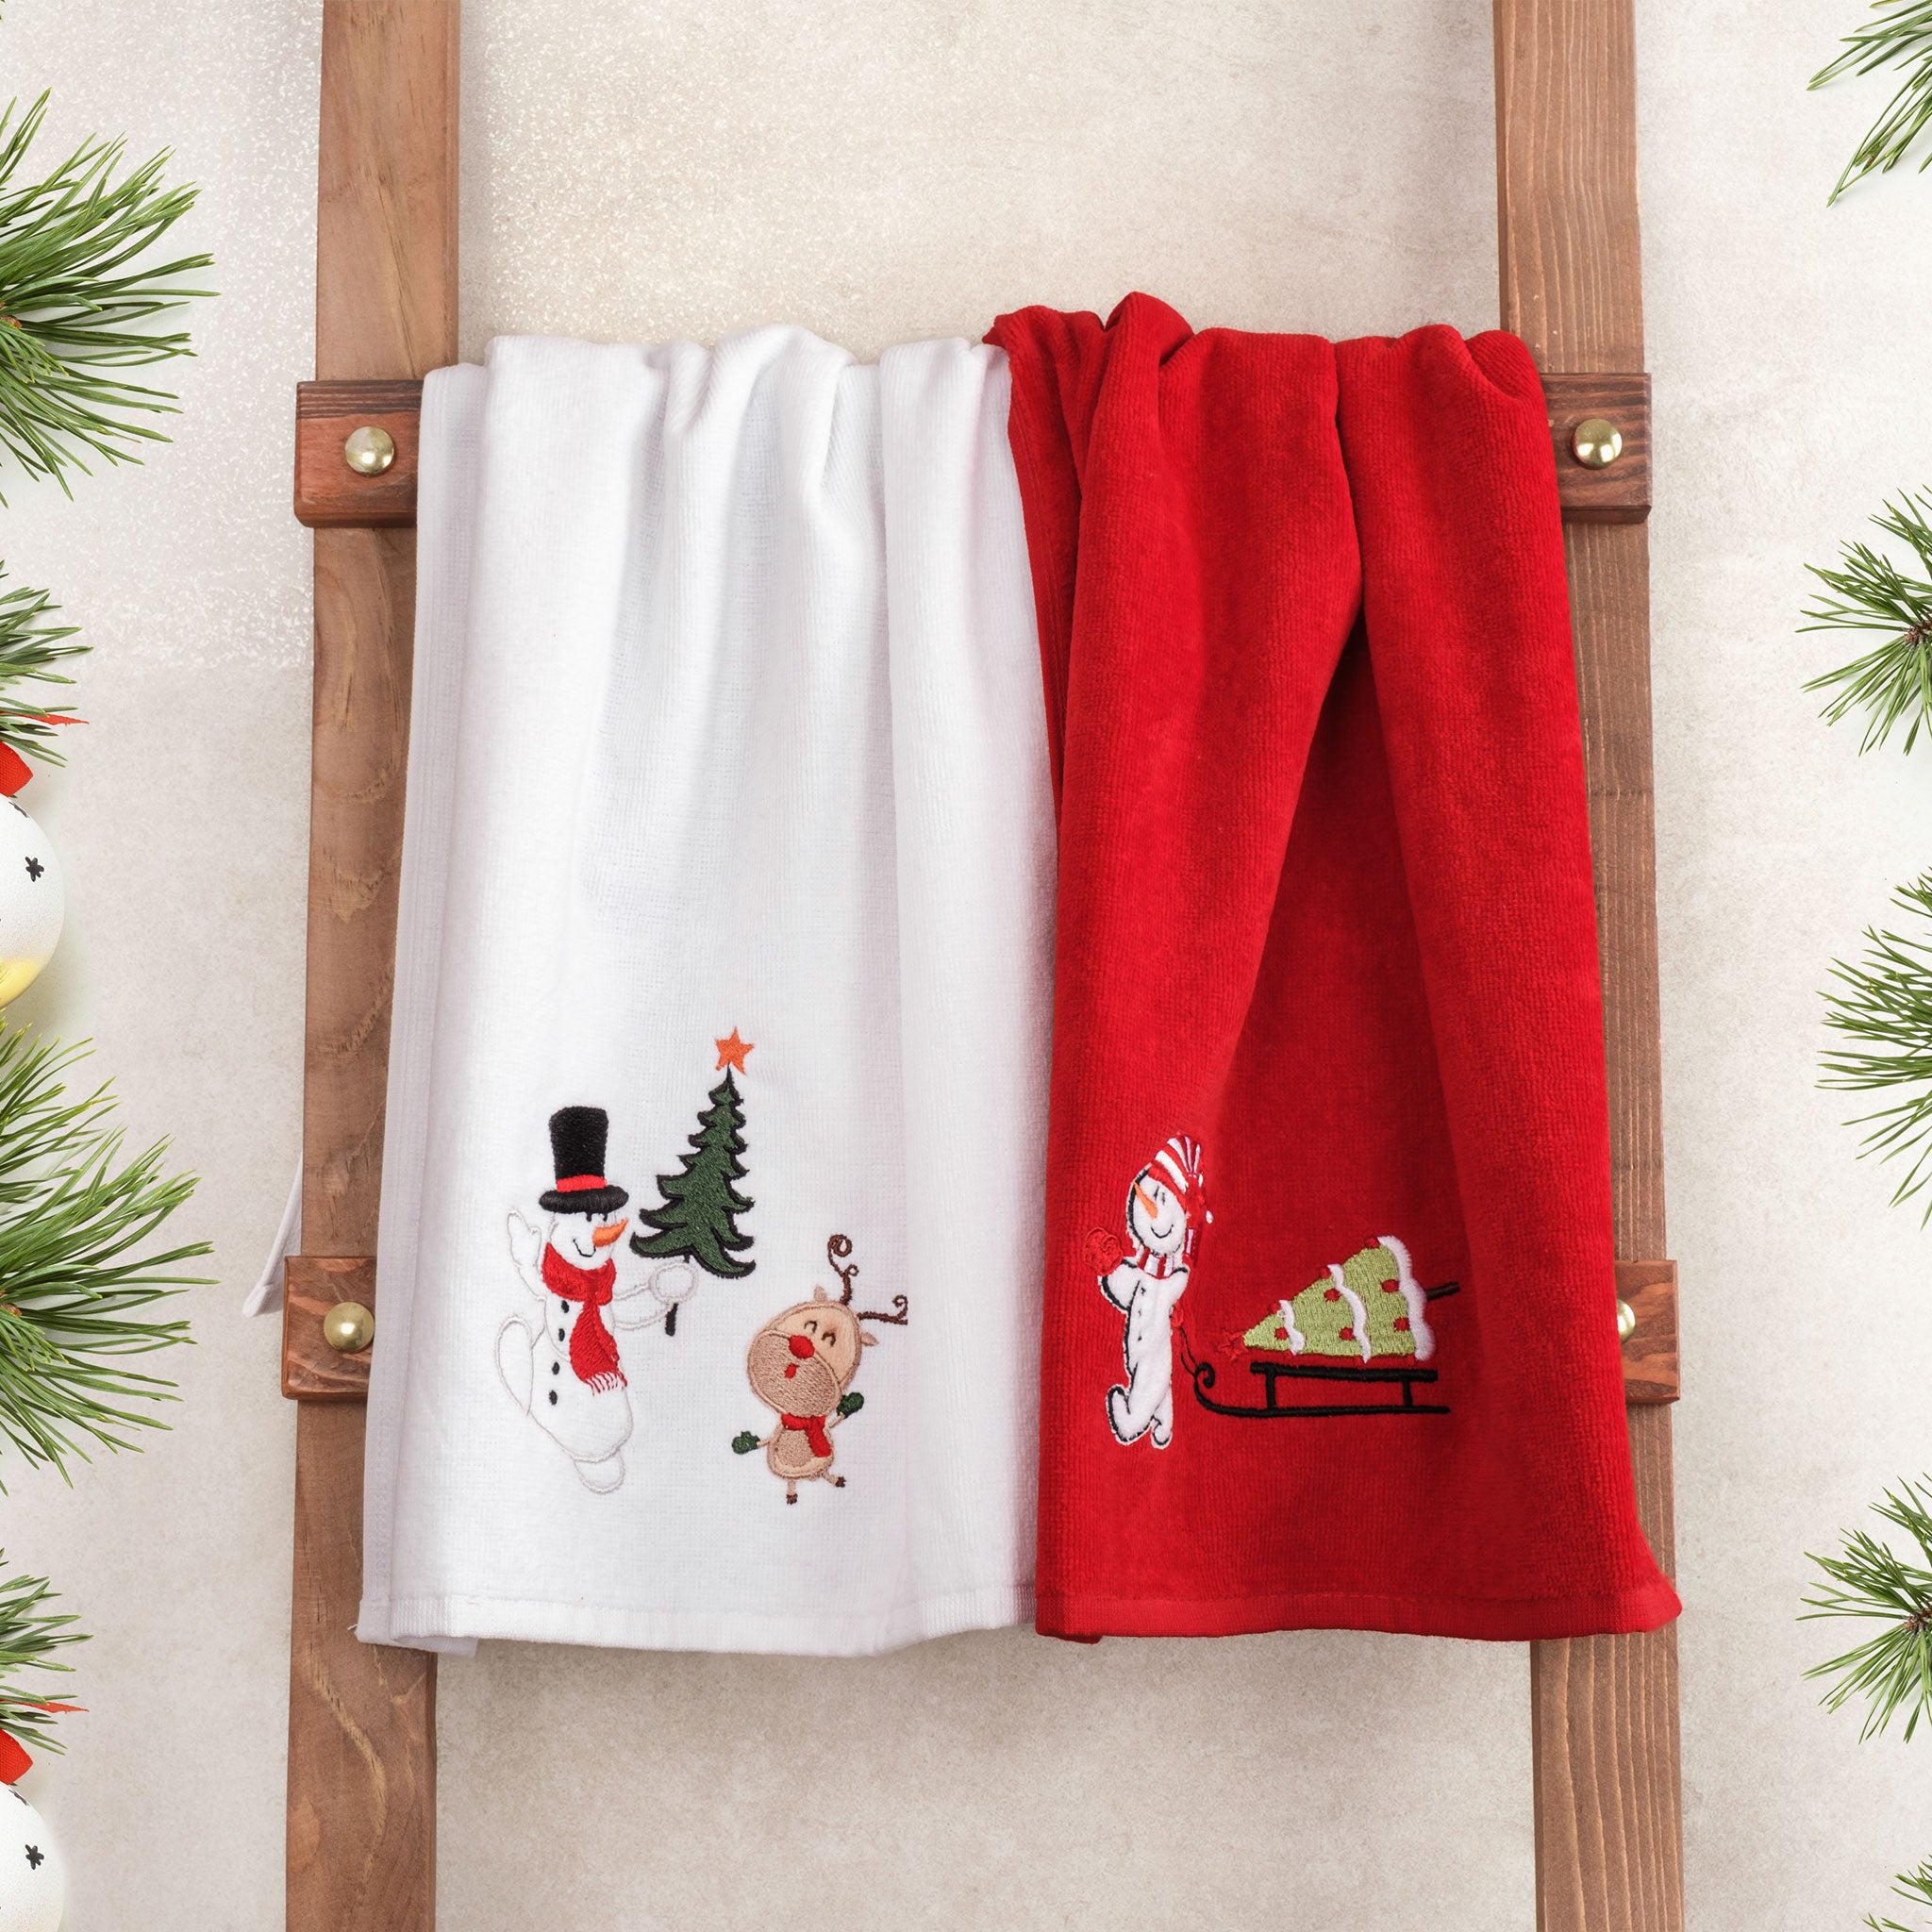 American Soft Linen - Christmas Towels 2 Packed Embroidered Towels for Decor Xmas - Snowmen - 3